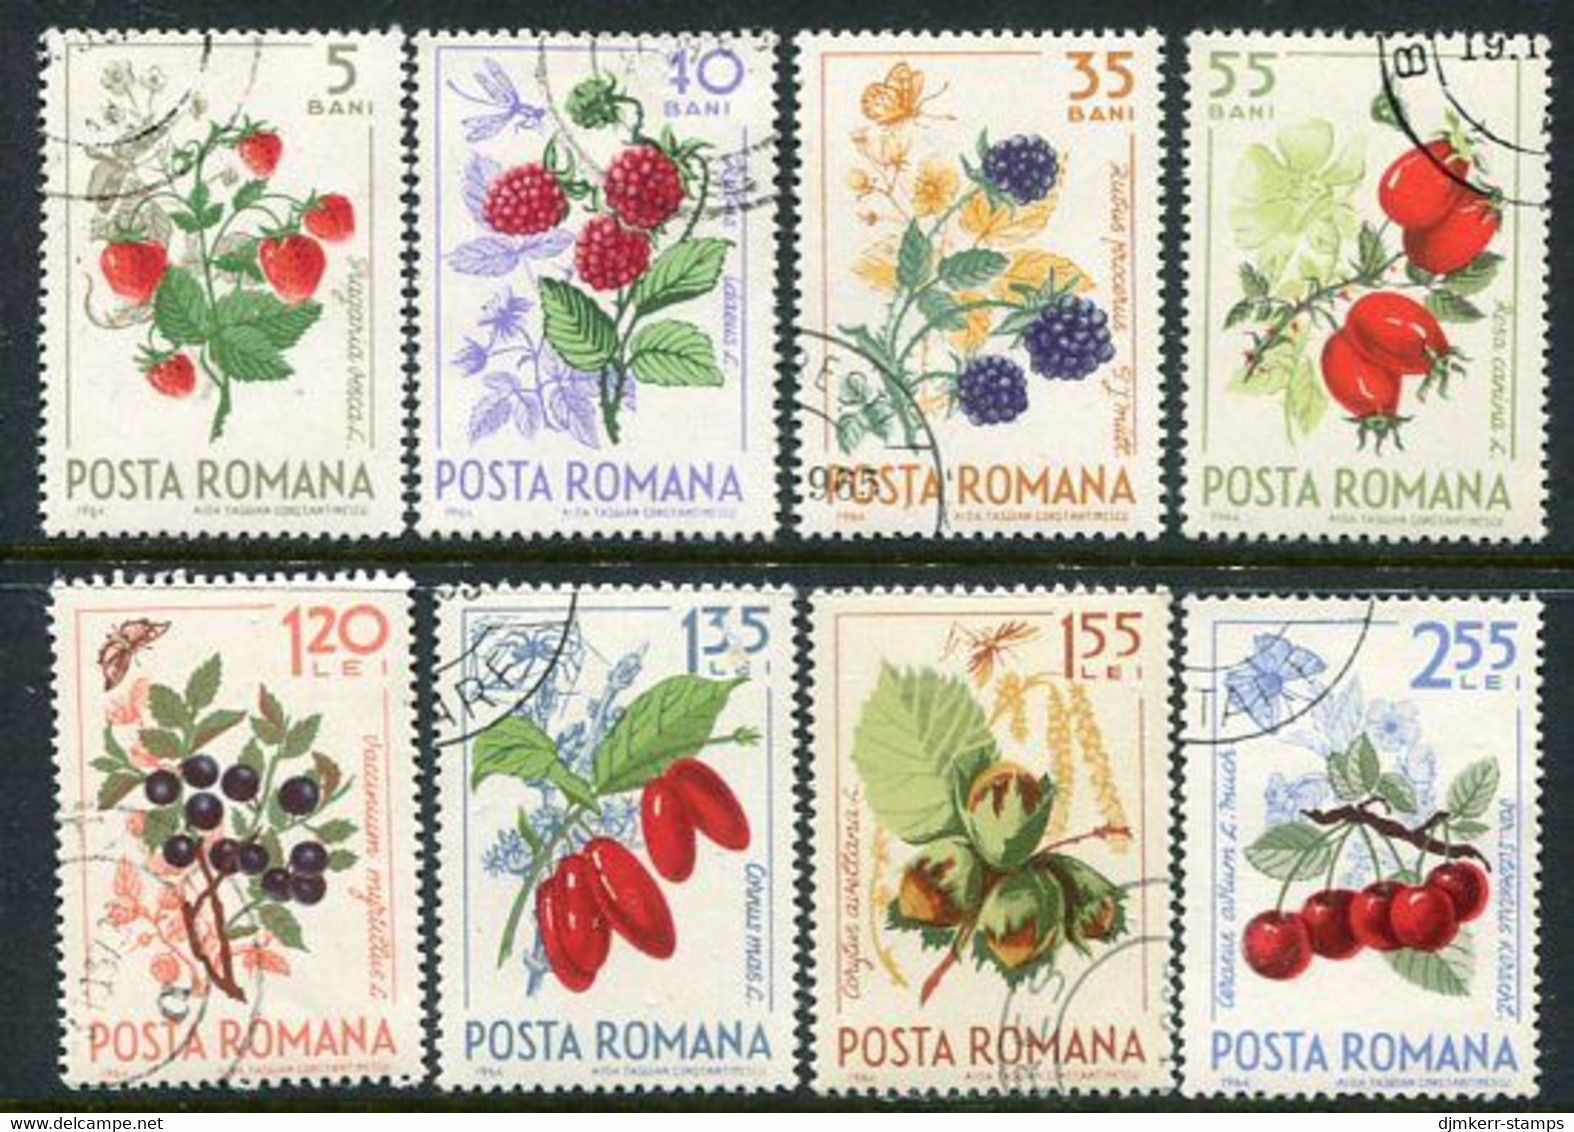 ROMANIA 1964 Wild Berries Used.  Michel 2361-68 - Used Stamps